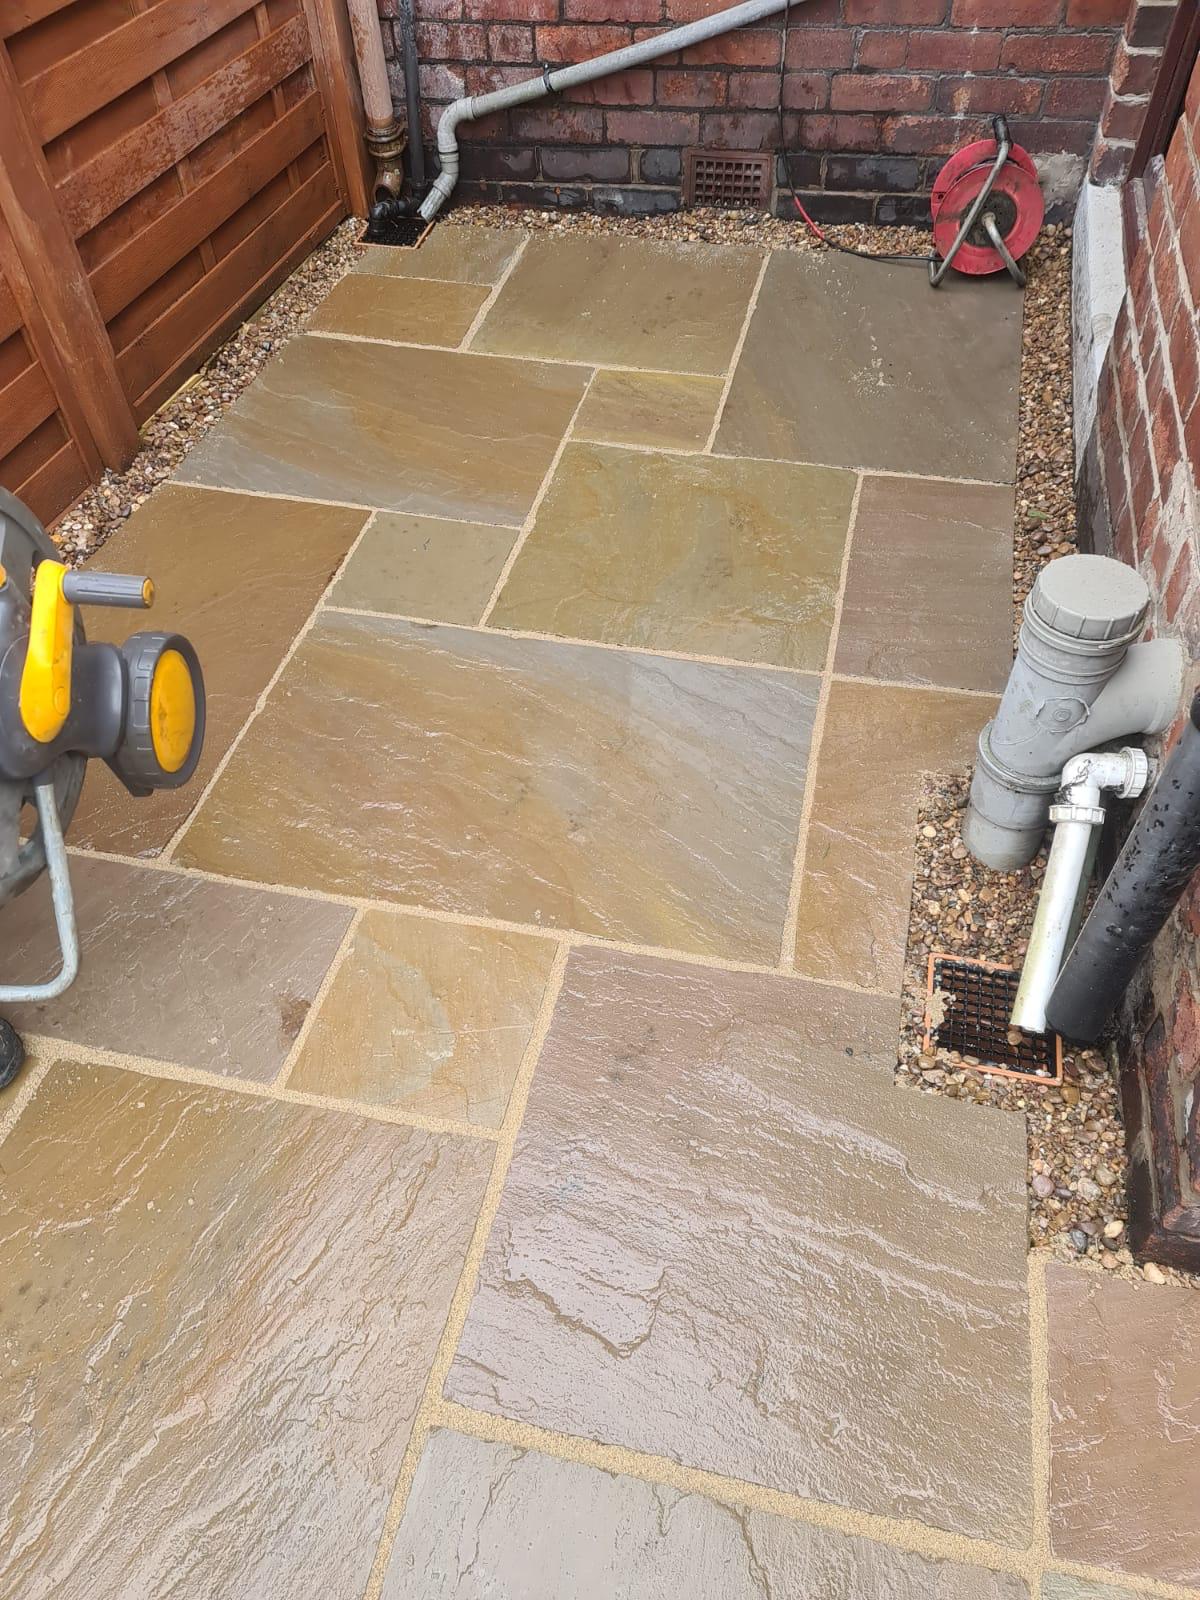 Fencing York Indian sandstone paving down side of house in York